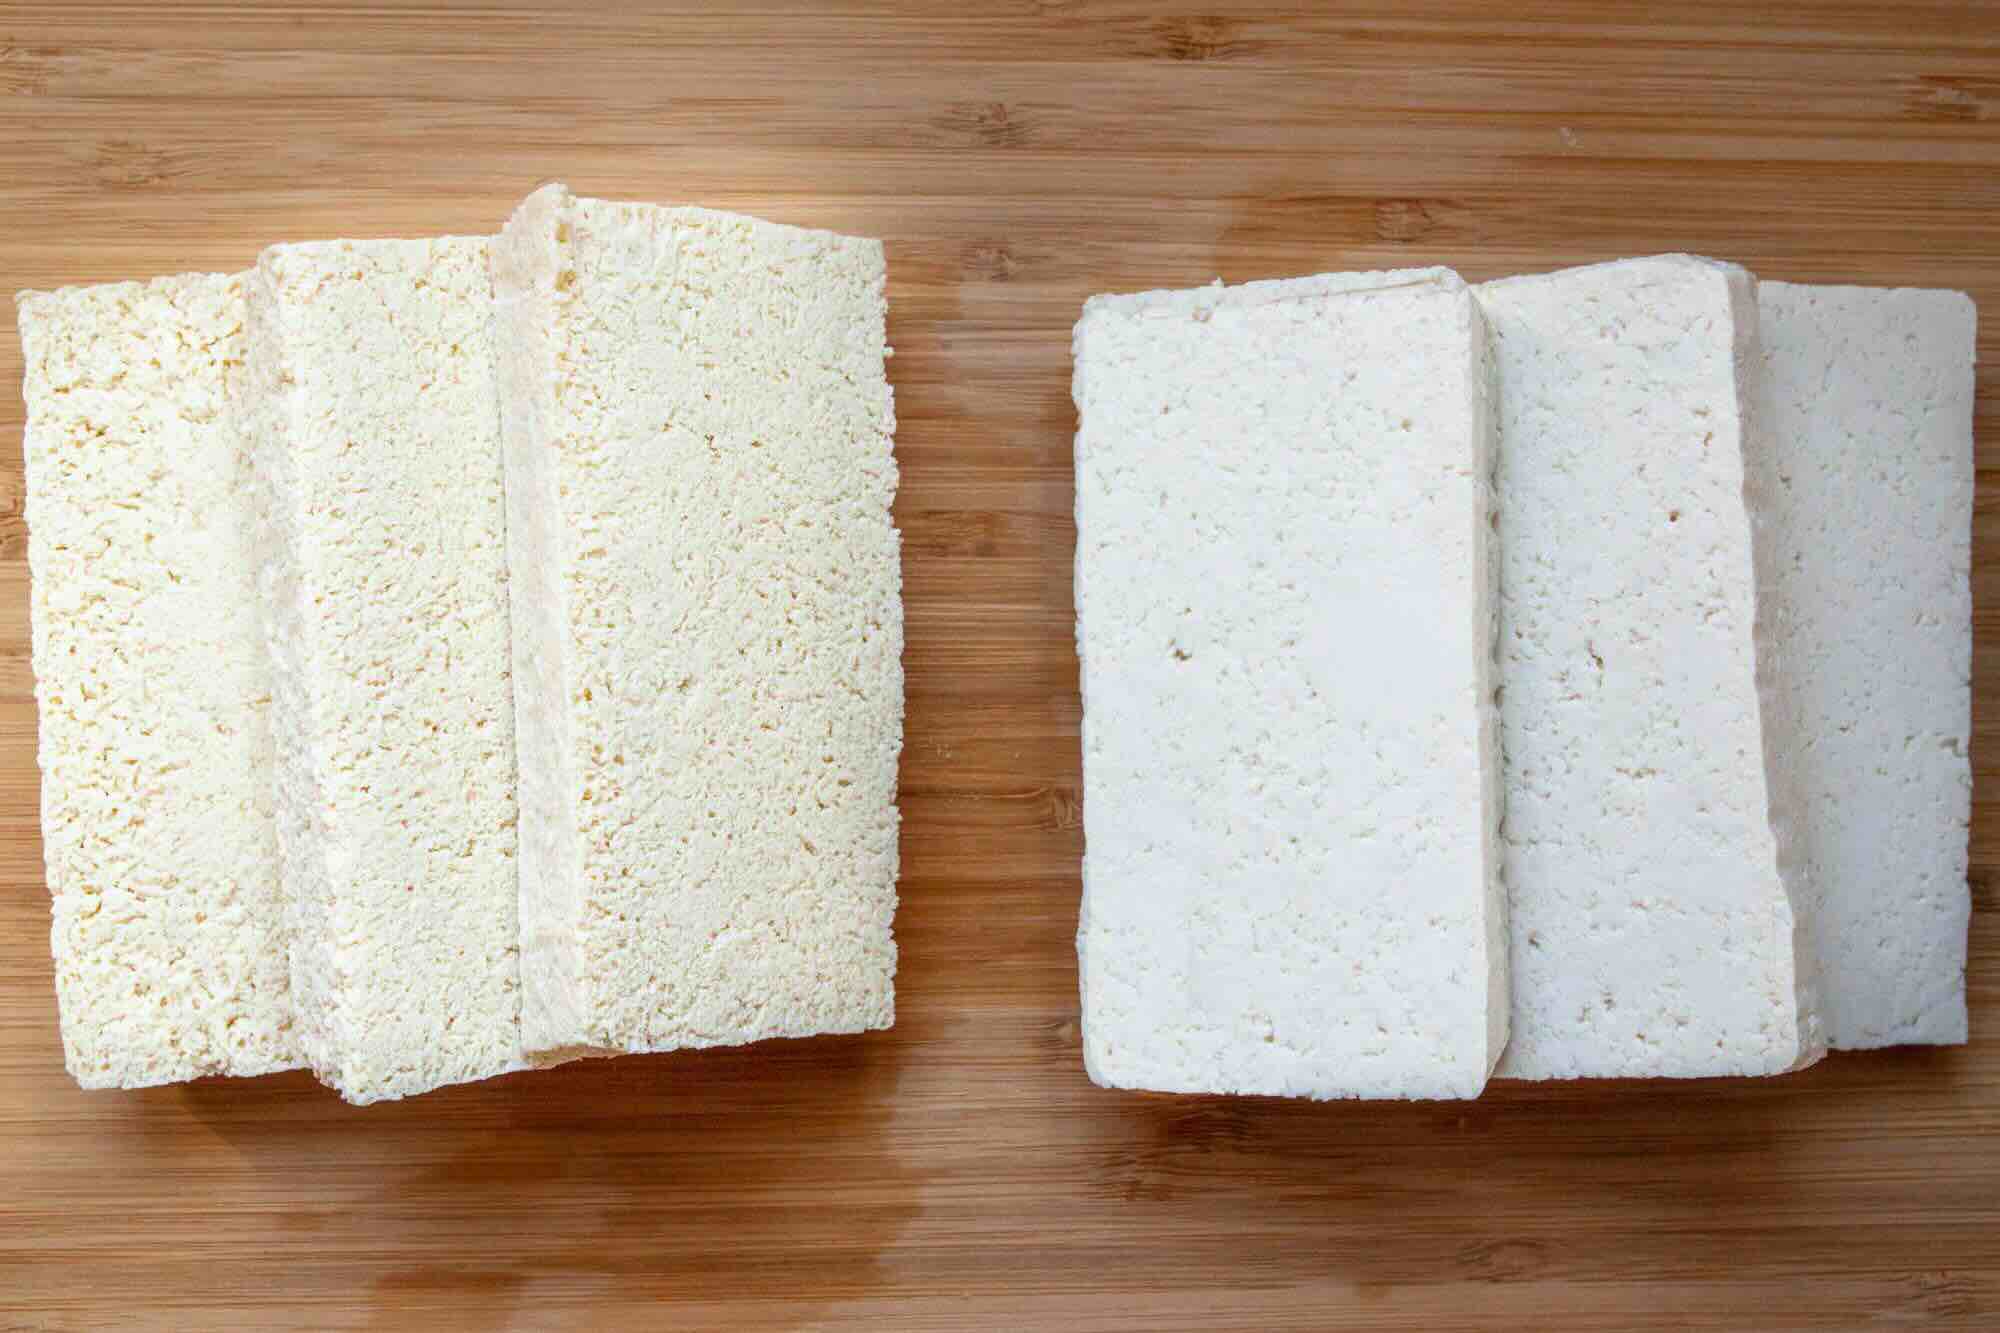 How To Store Tofu In Freezer